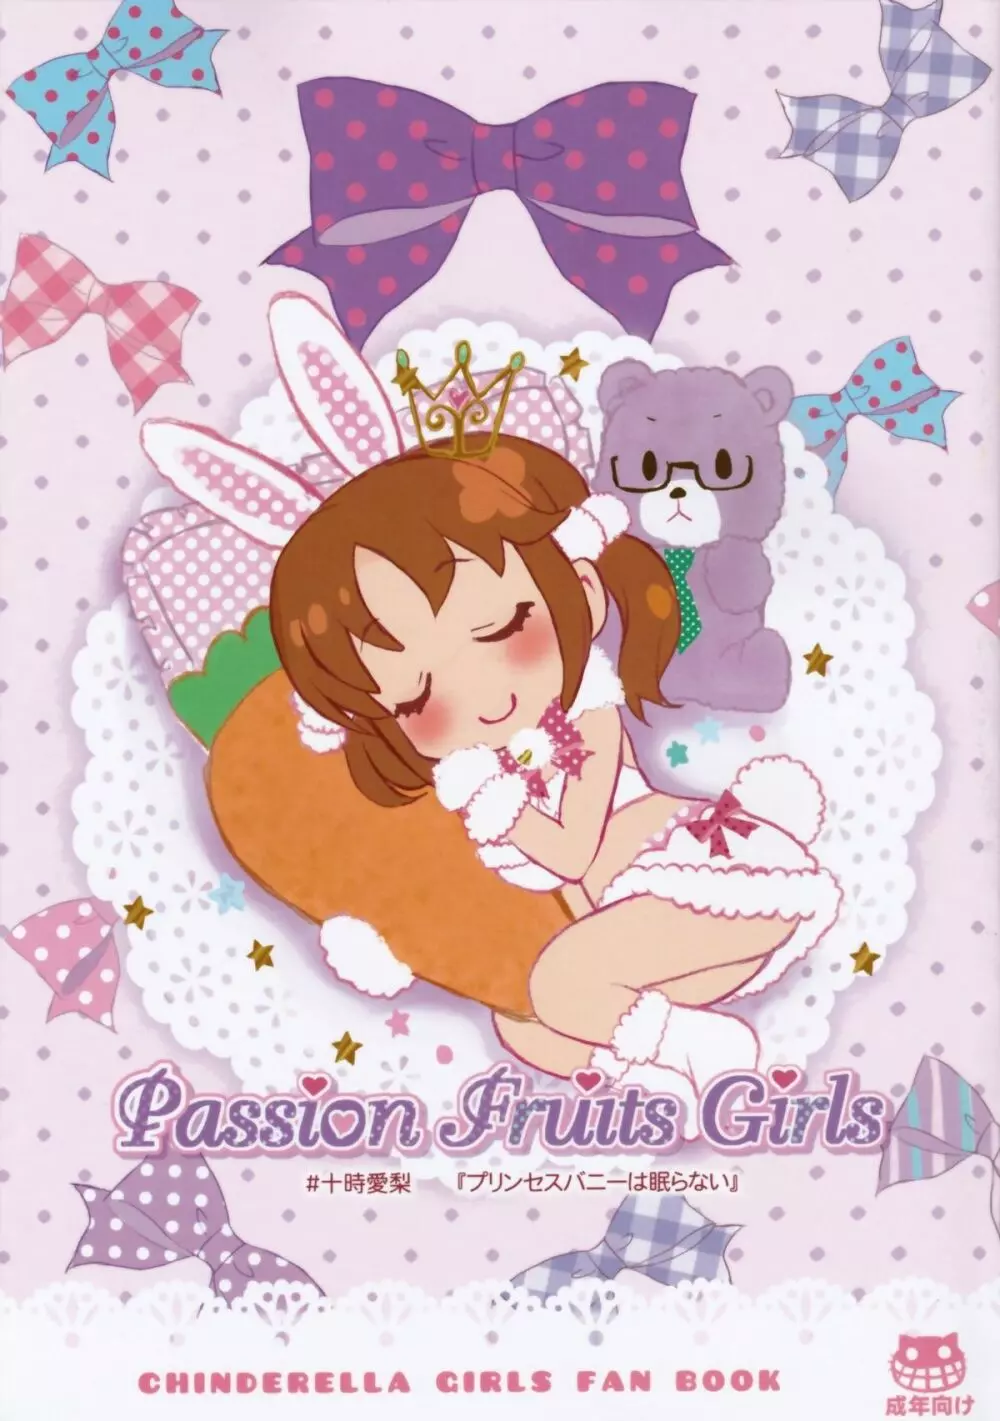 Passion Fruit Girls #十時愛梨 プリンセスバニーは眠らない。 - page1